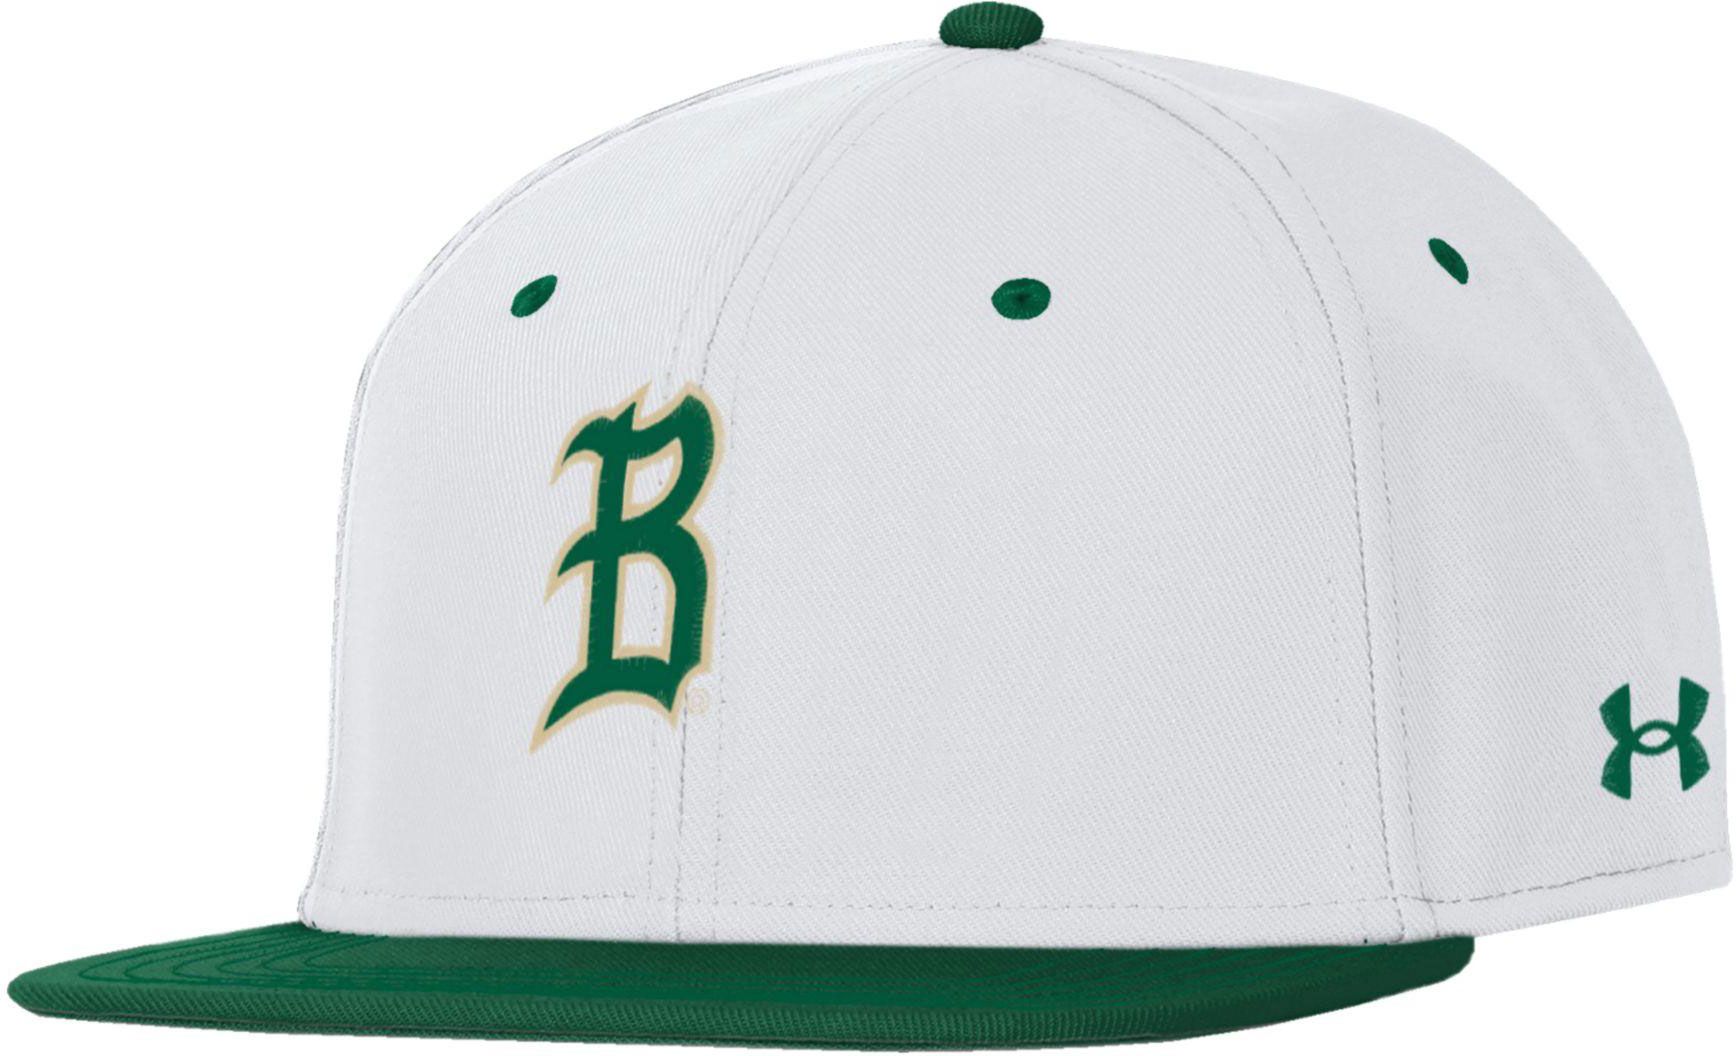 Under Armour Men's UAB Blazers White Fitted Baseball Hat